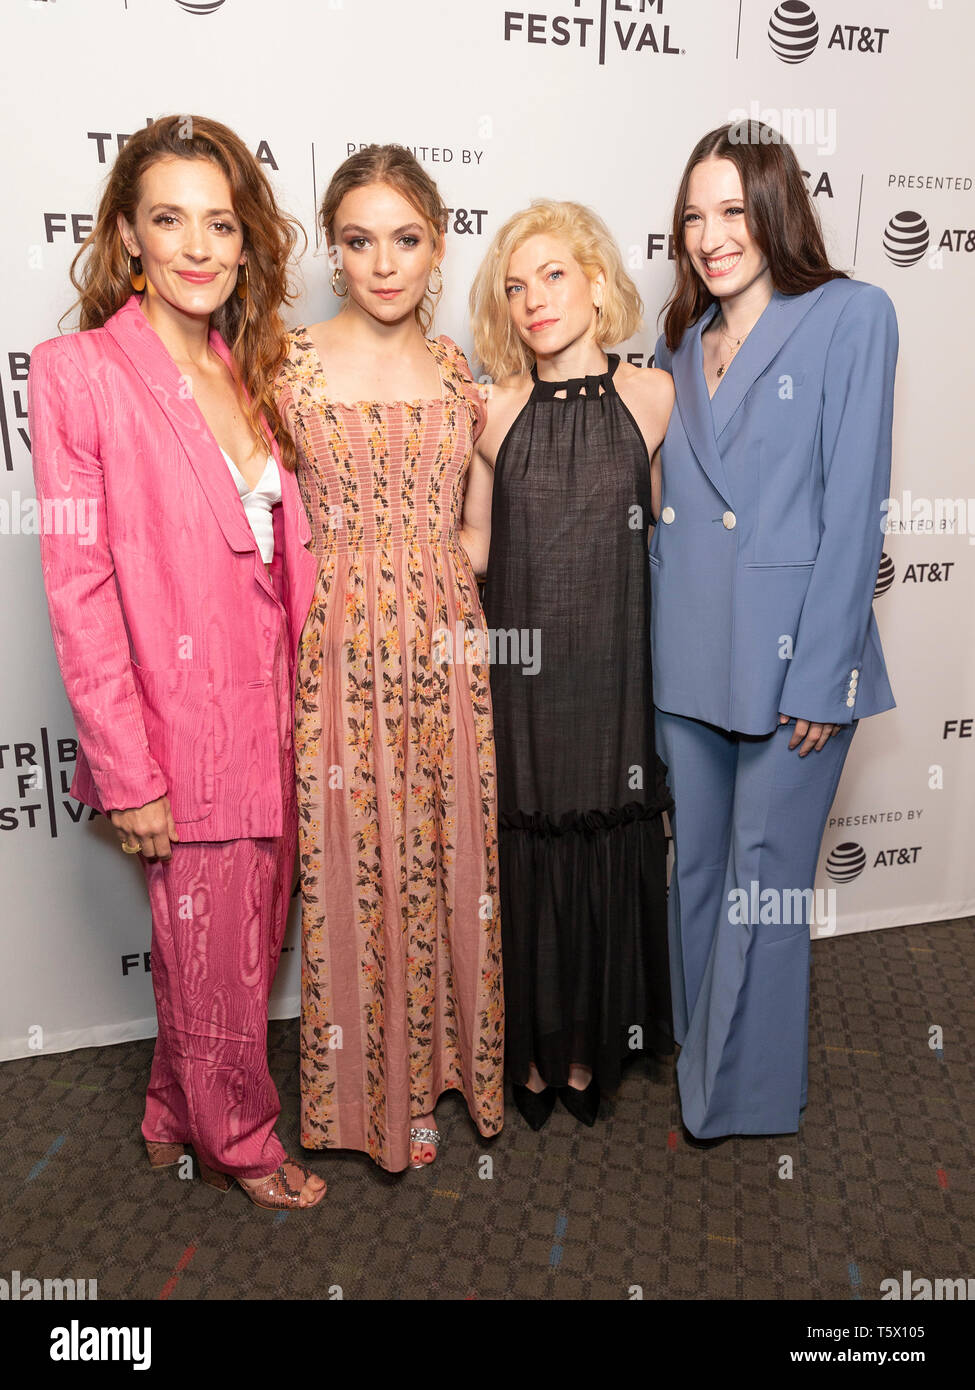 New York, United States. 26th Apr, 2019. Danielle Krudy, Morgan Saylor, Bridget Savage Cole, Sophie Lowe attend the Blow The Man Down screening at Tribeca Film Festival at SVA Theatre Credit: Lev Radin/Pacific Press/Alamy Live News Stock Photo